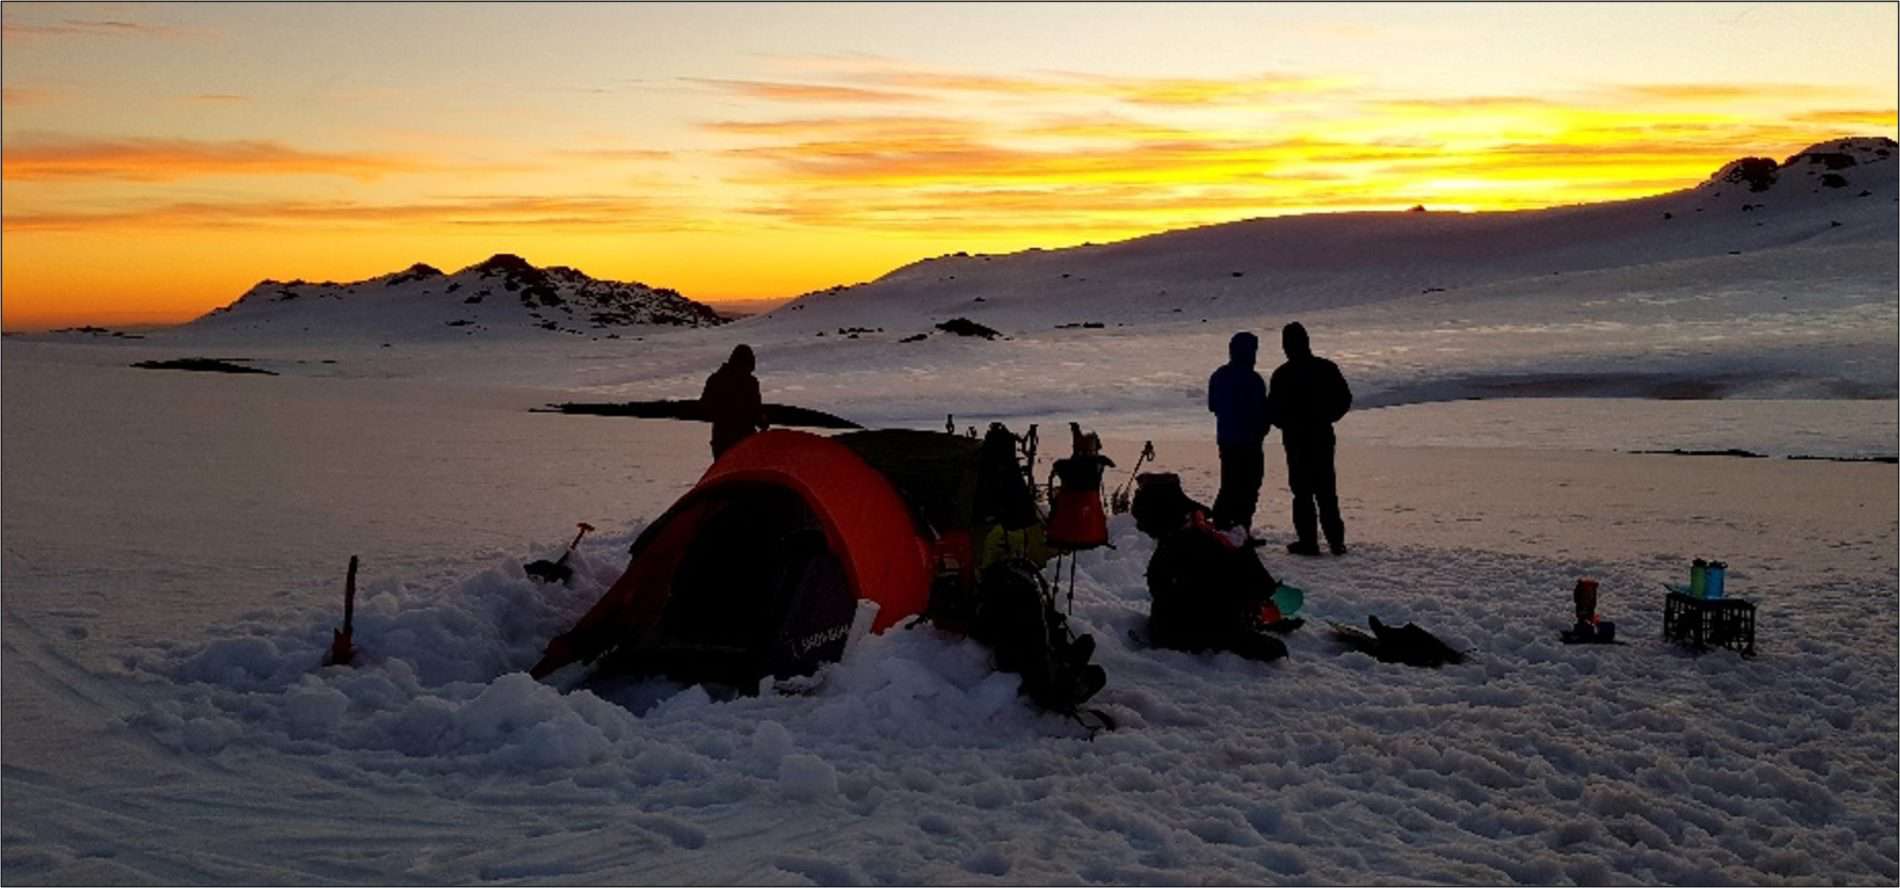 Scouts camping in the snow during sunset